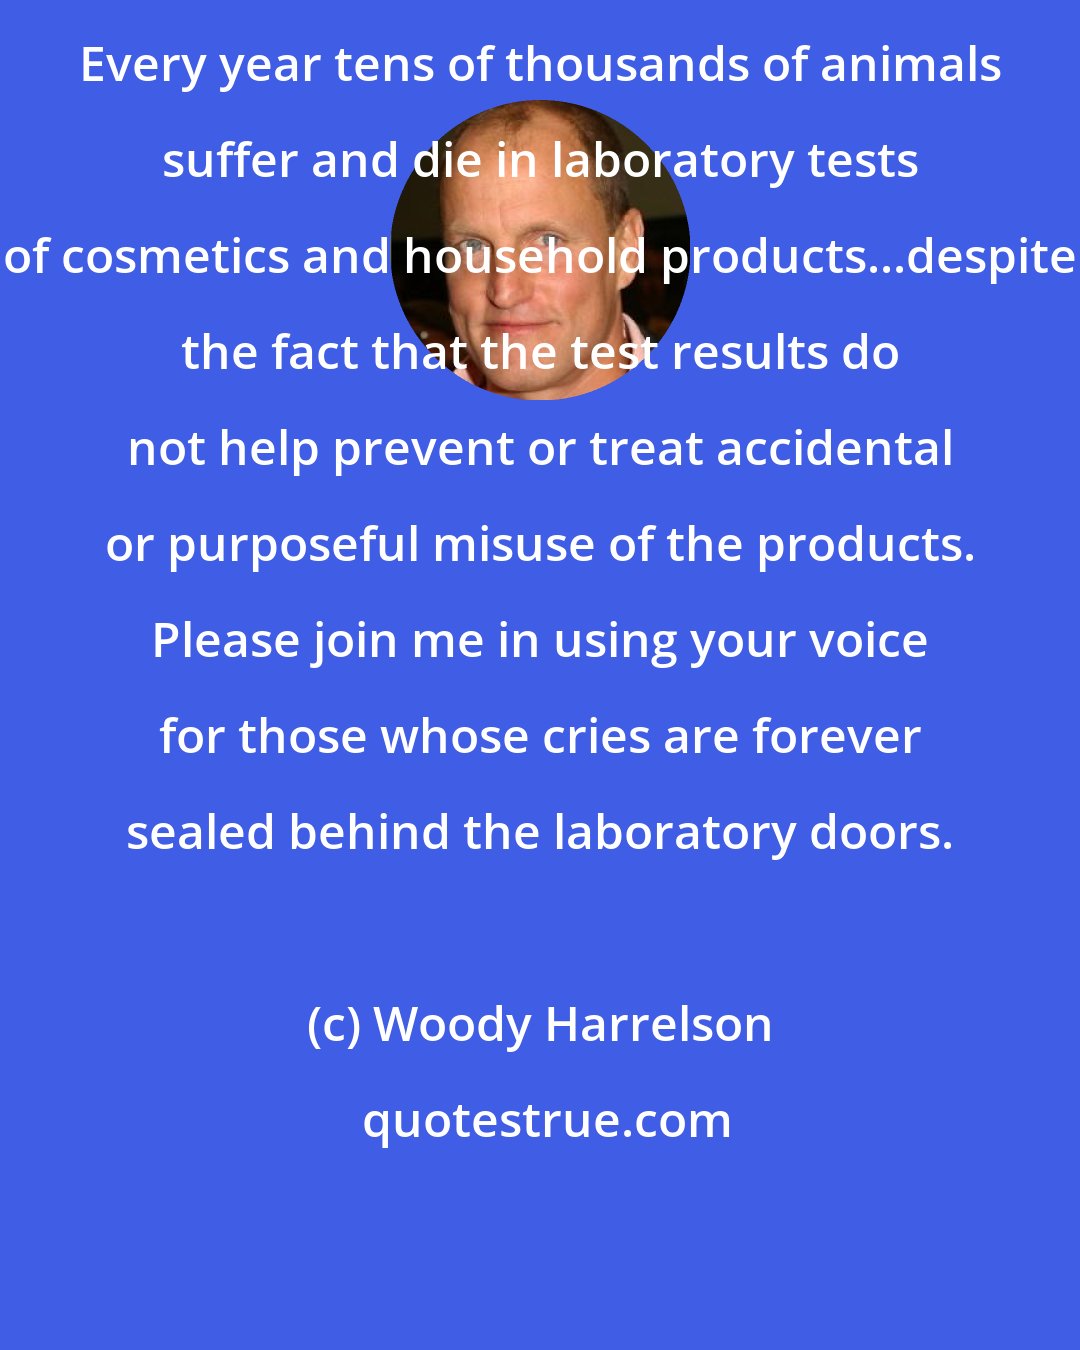 Woody Harrelson: Every year tens of thousands of animals suffer and die in laboratory tests of cosmetics and household products...despite the fact that the test results do not help prevent or treat accidental or purposeful misuse of the products. Please join me in using your voice for those whose cries are forever sealed behind the laboratory doors.